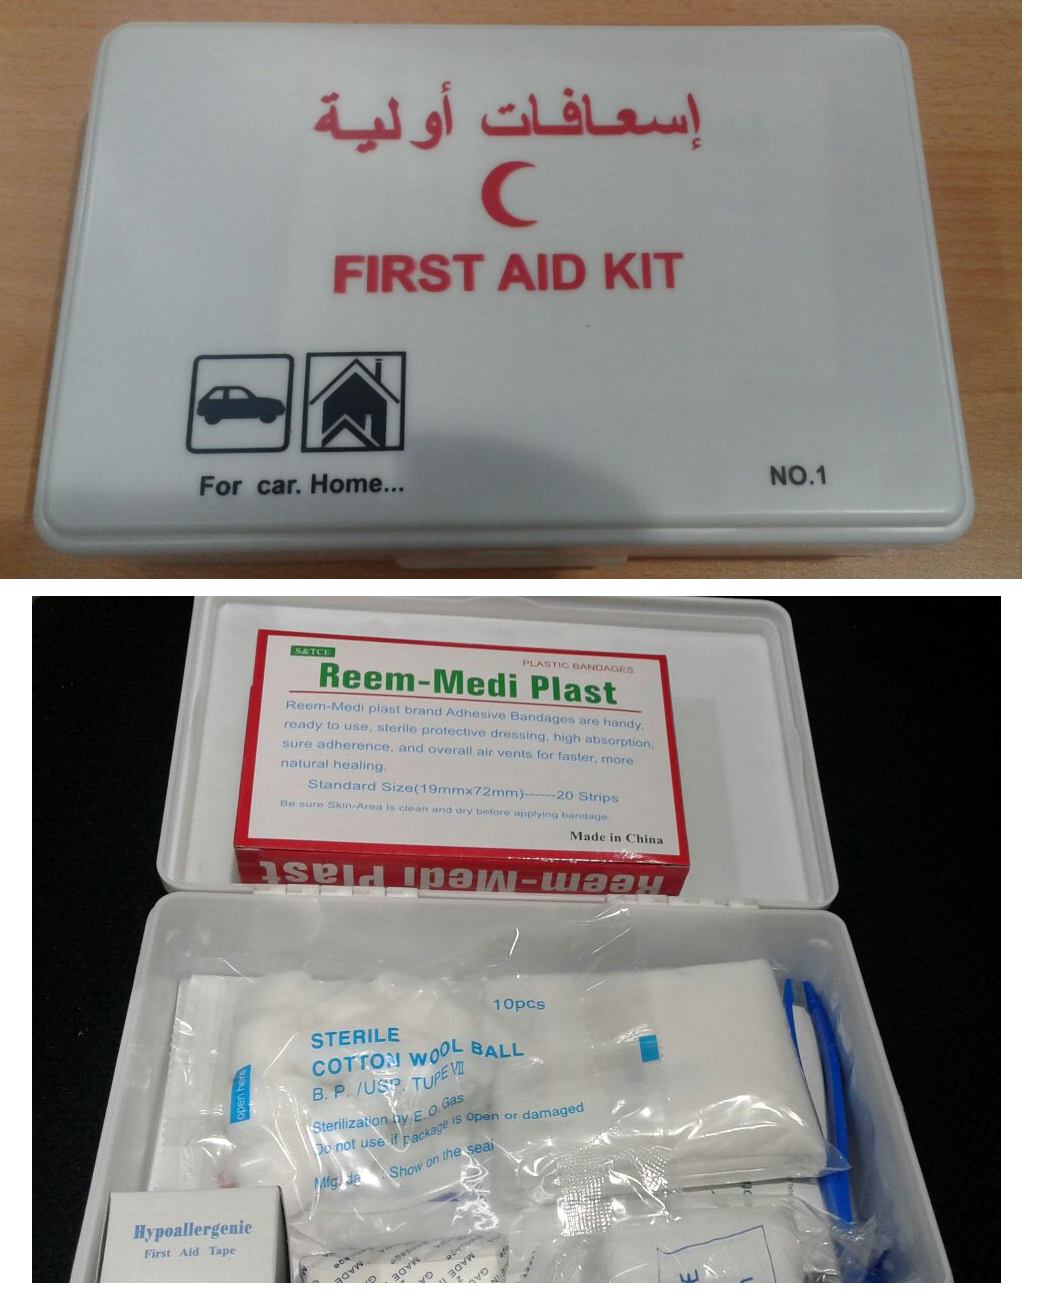 FIRST AID KIT FOR CAR